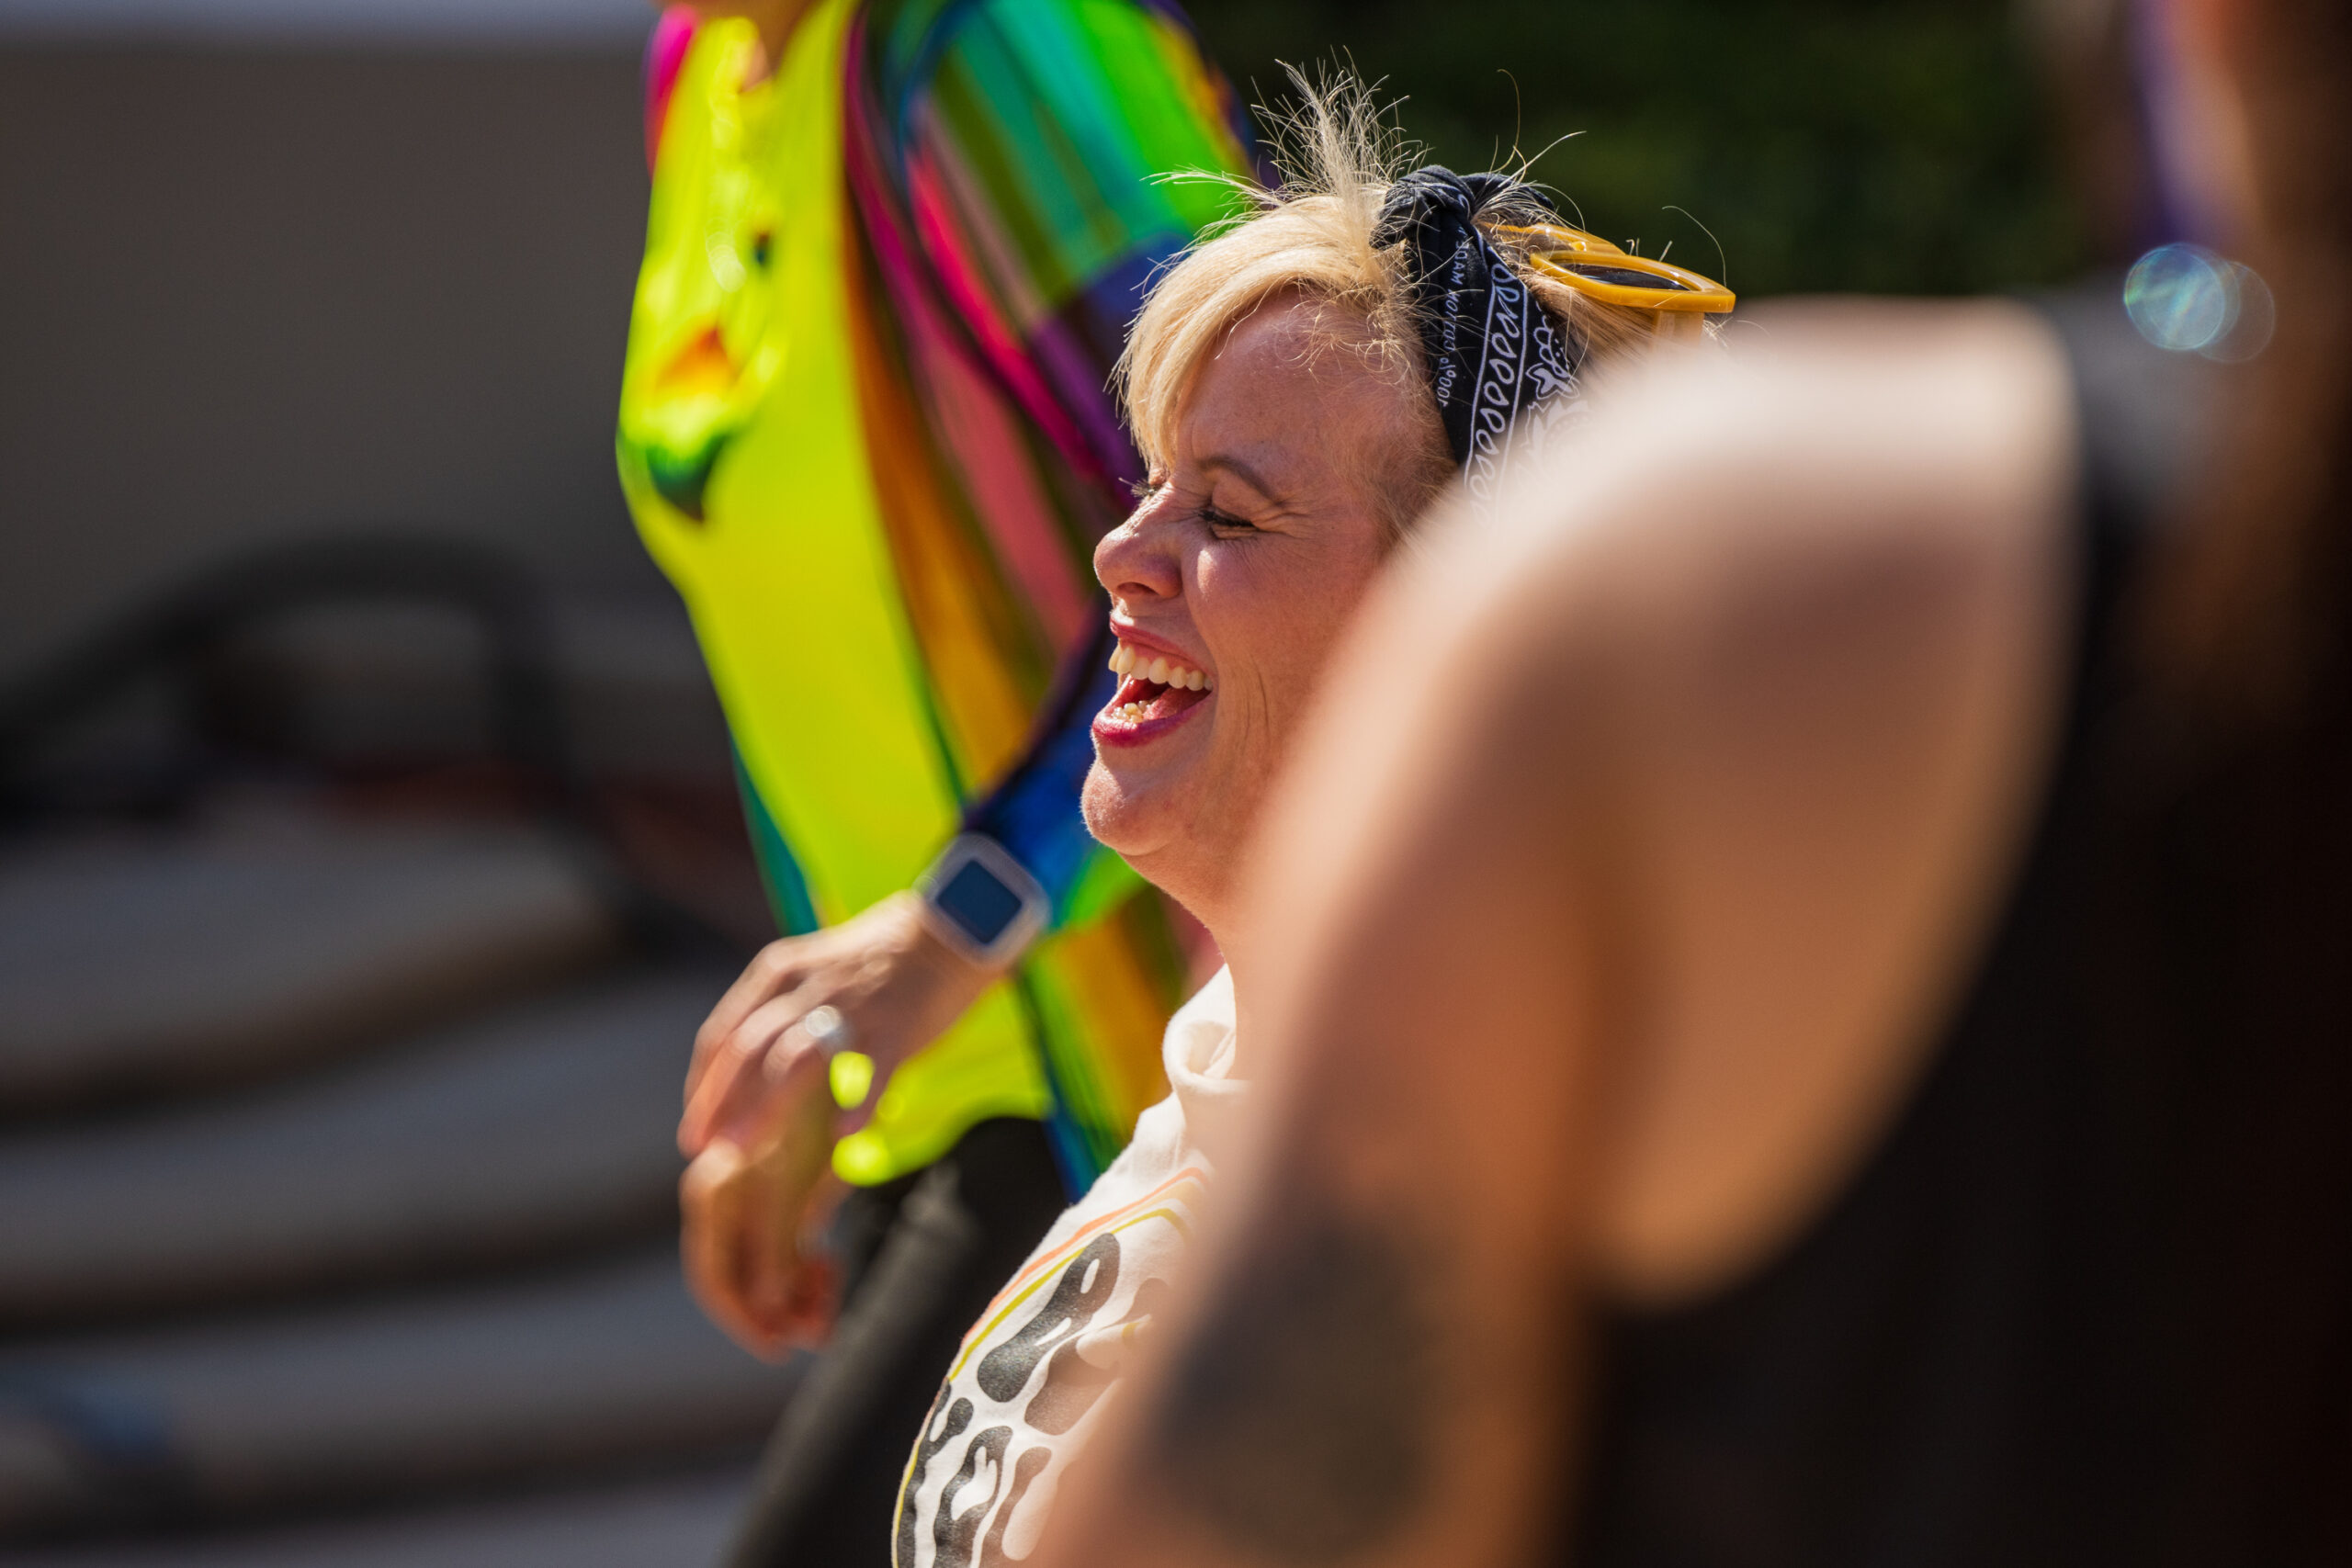 Woman with blonde hair wearing a black bandana and yellow oversized sunglasses on head laughs while being partially obscured by a shoulder of an out of focus woman with black tank top.